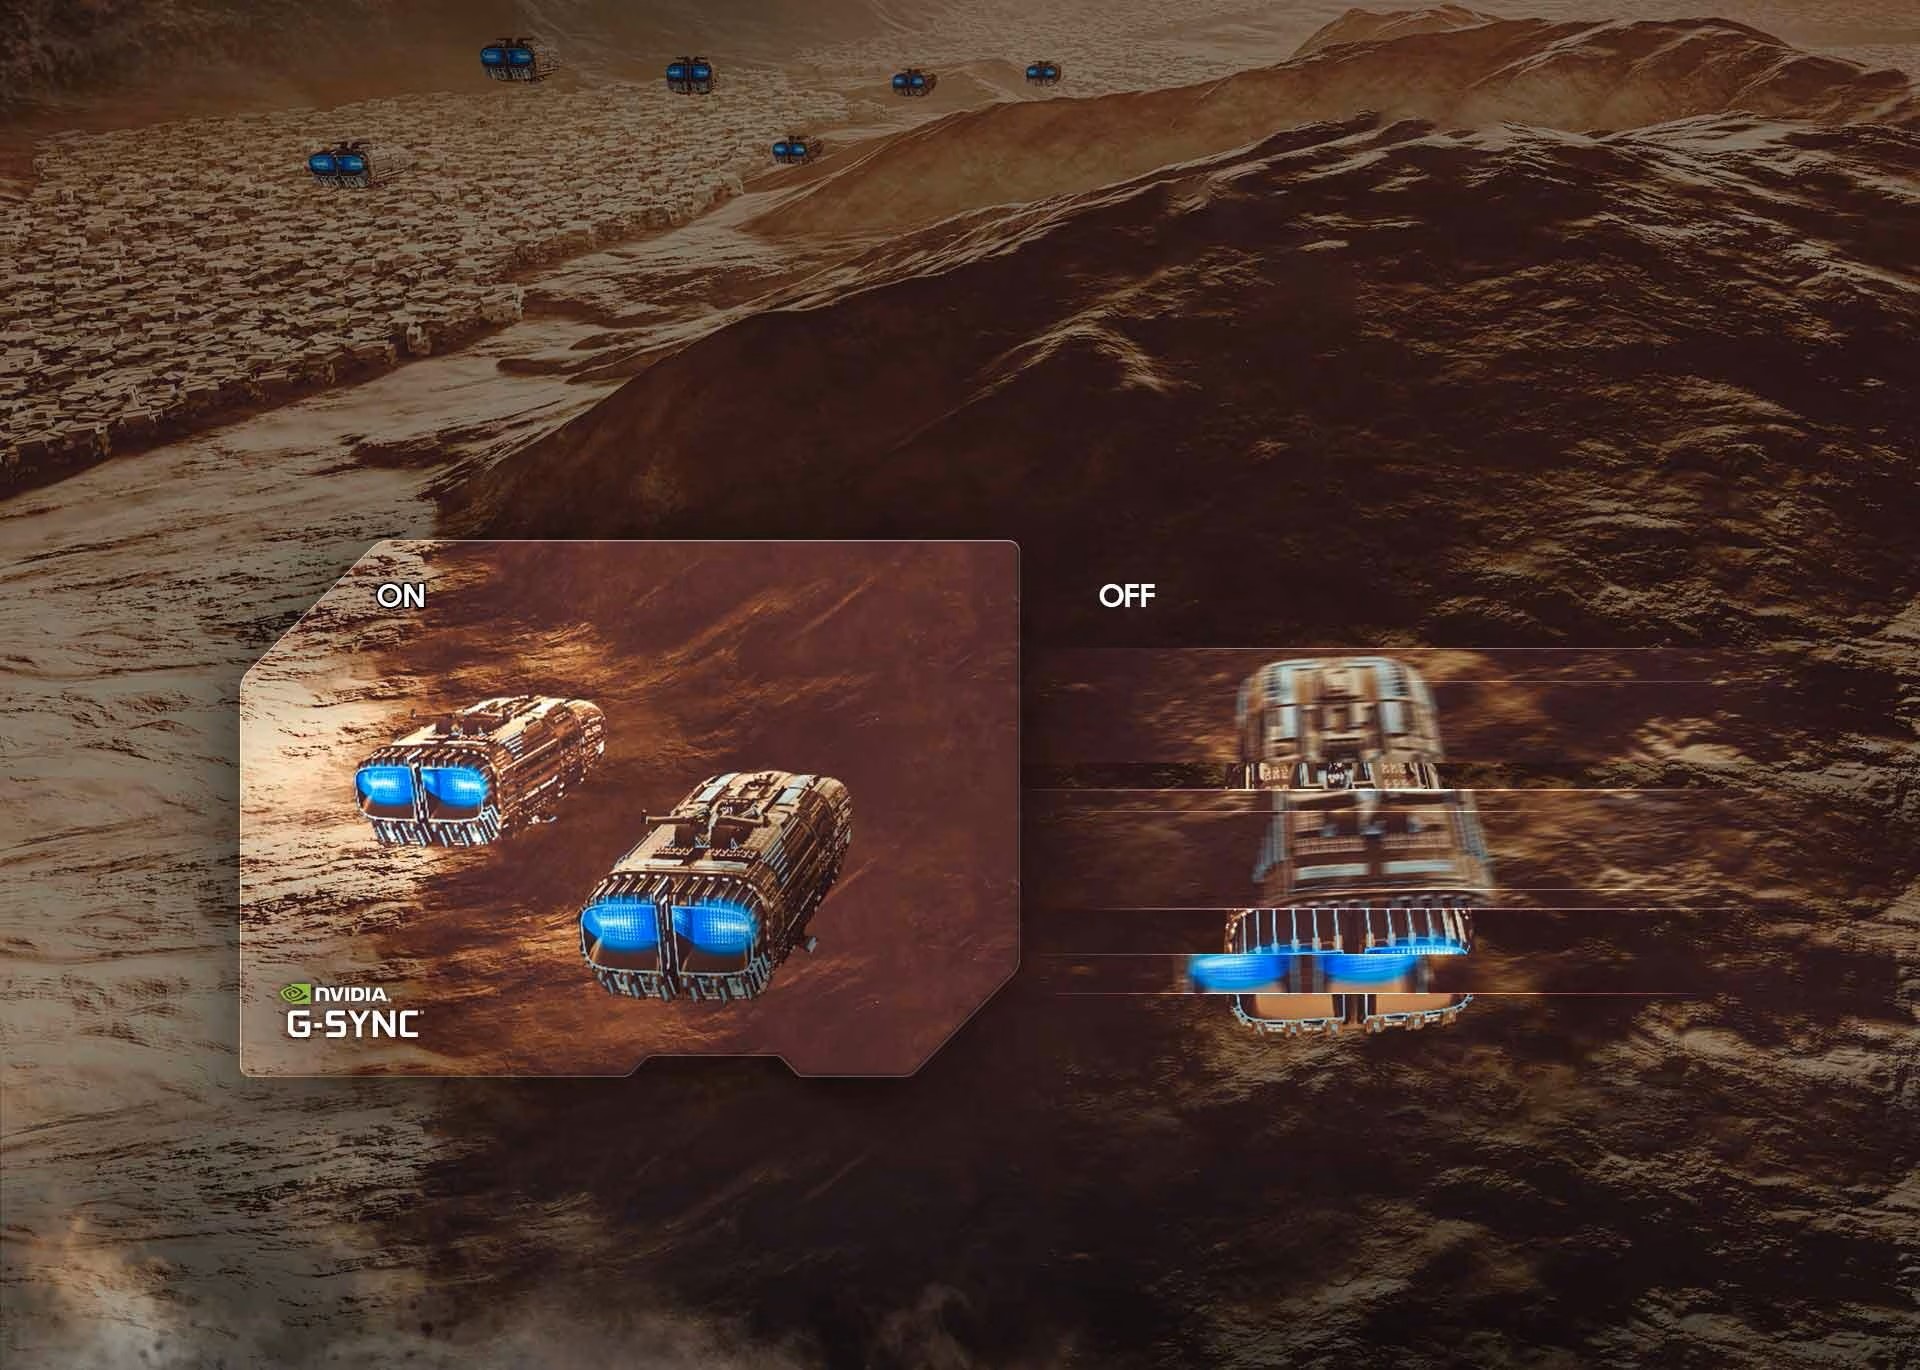 Three spaceships with blue neon light emitting from their backs fly over rocky terrain. The two ships on the left appear smooth and show the words “ON” above and “NVIDIA G-SYNC” logo below. The right ship appears disconnected, and the word “OFF” appears above it. 